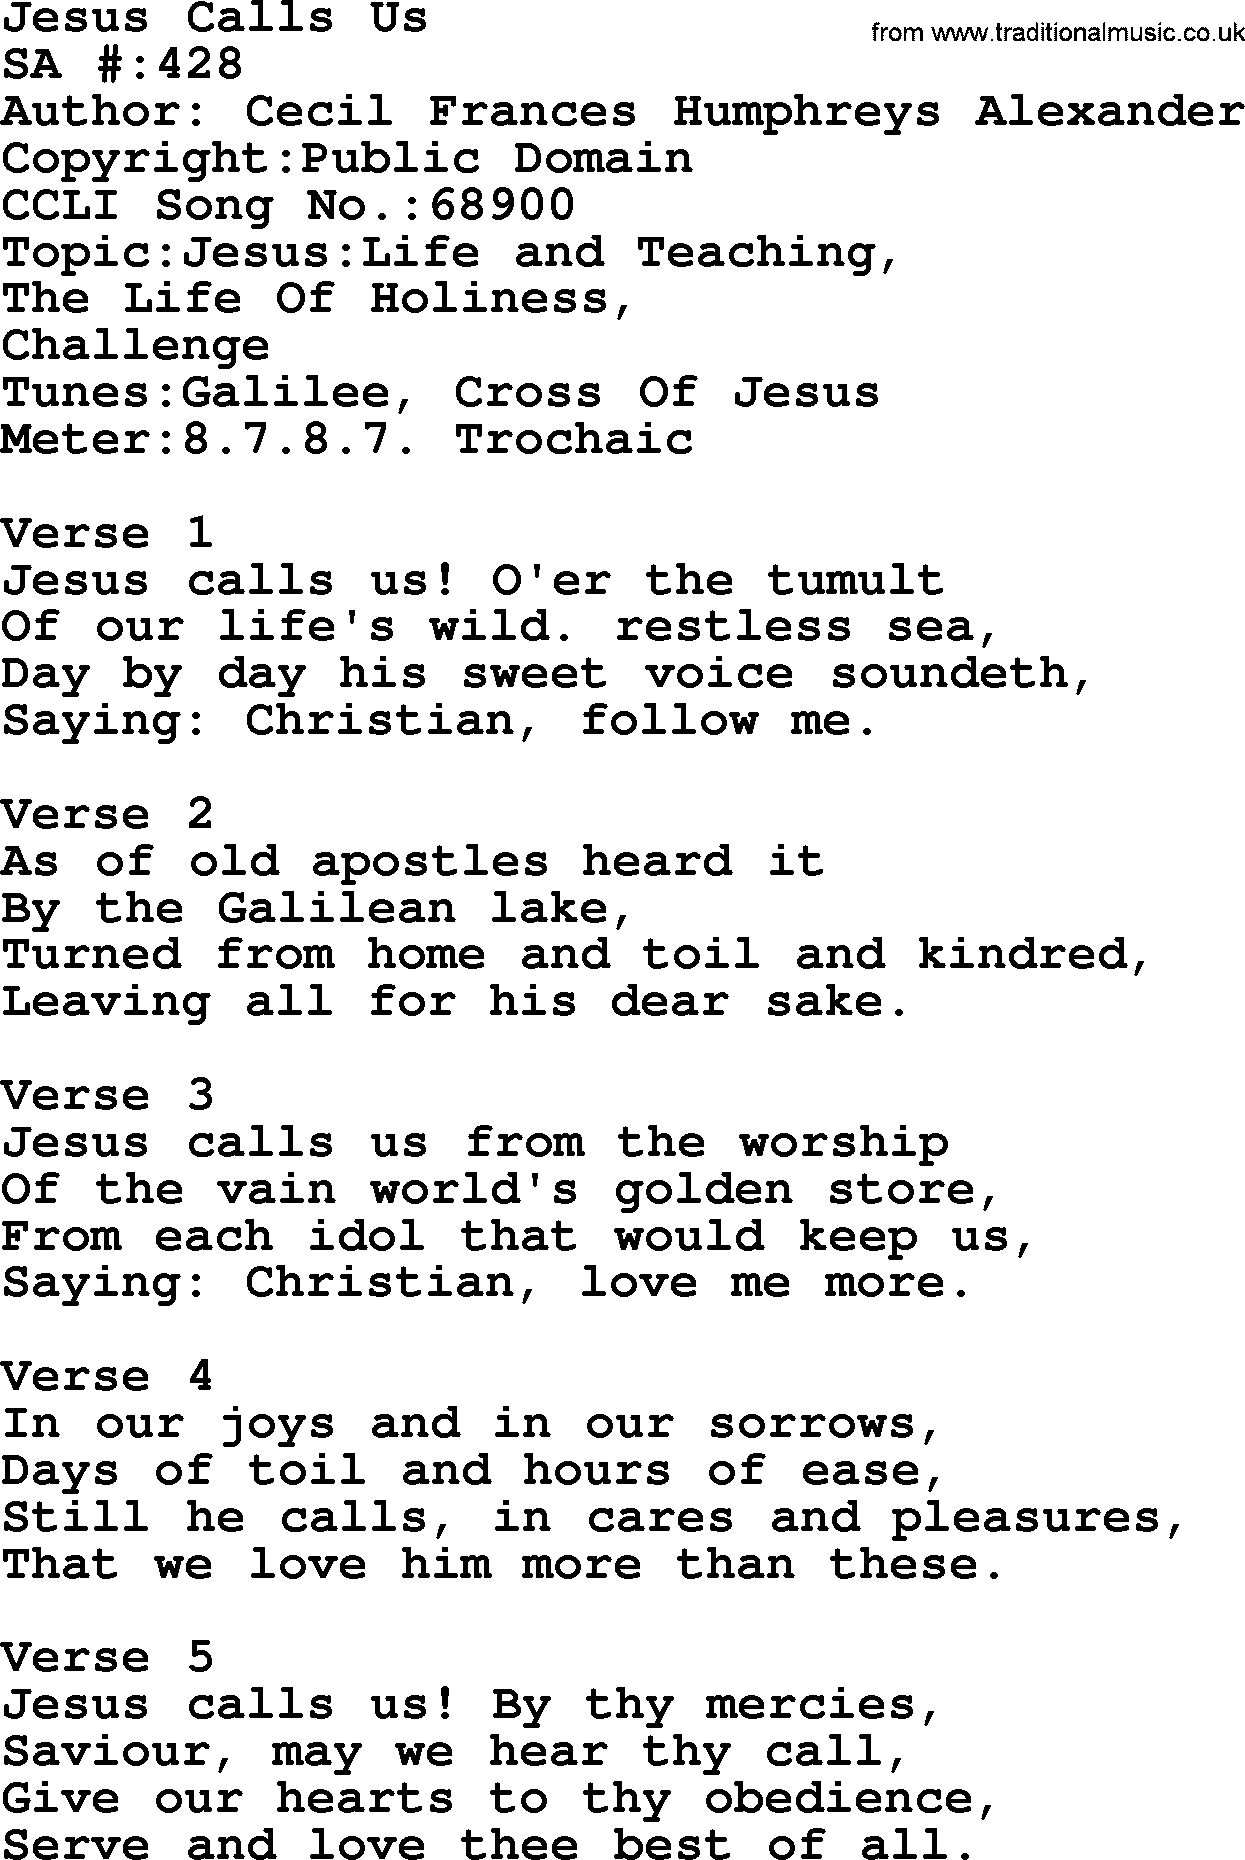 Salvation Army Hymnal, title: Jesus Calls Us, with lyrics and PDF,